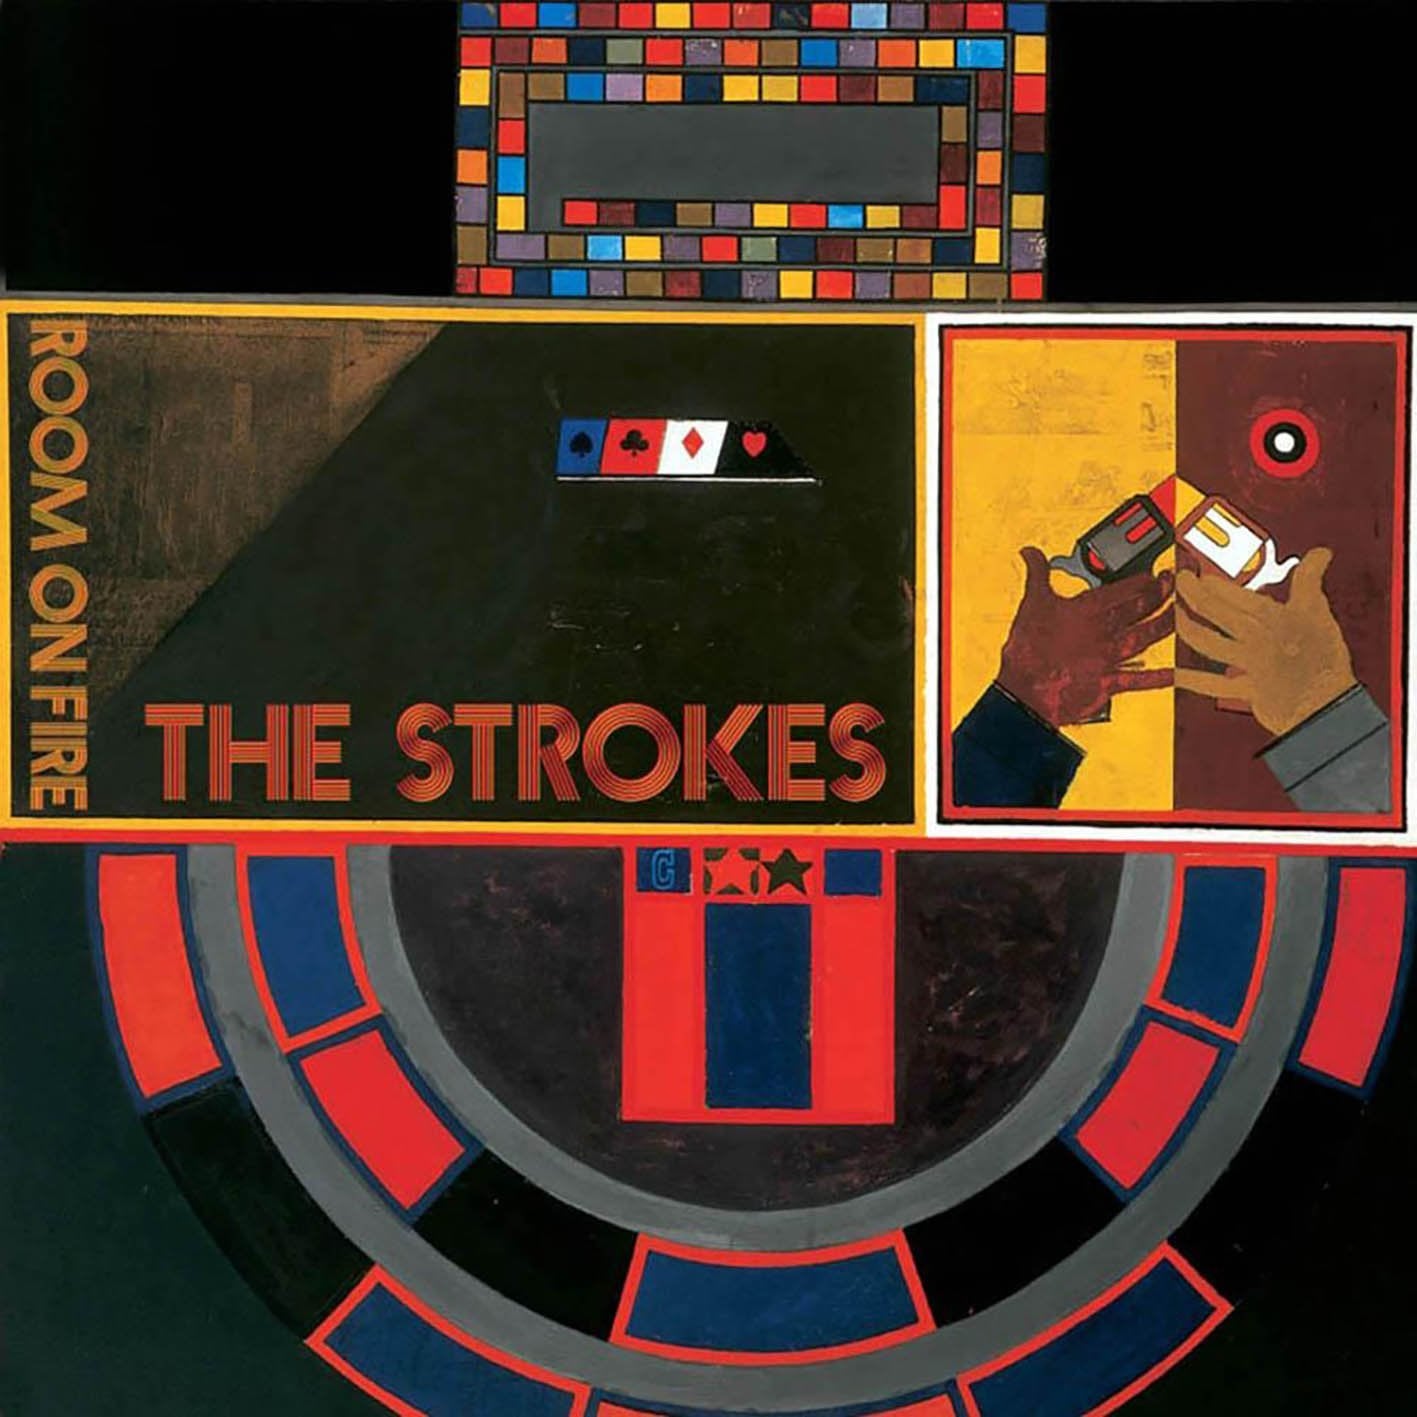 THE STROKES - ROOM ON FIRE - VINYL LP - Wah Wah Records